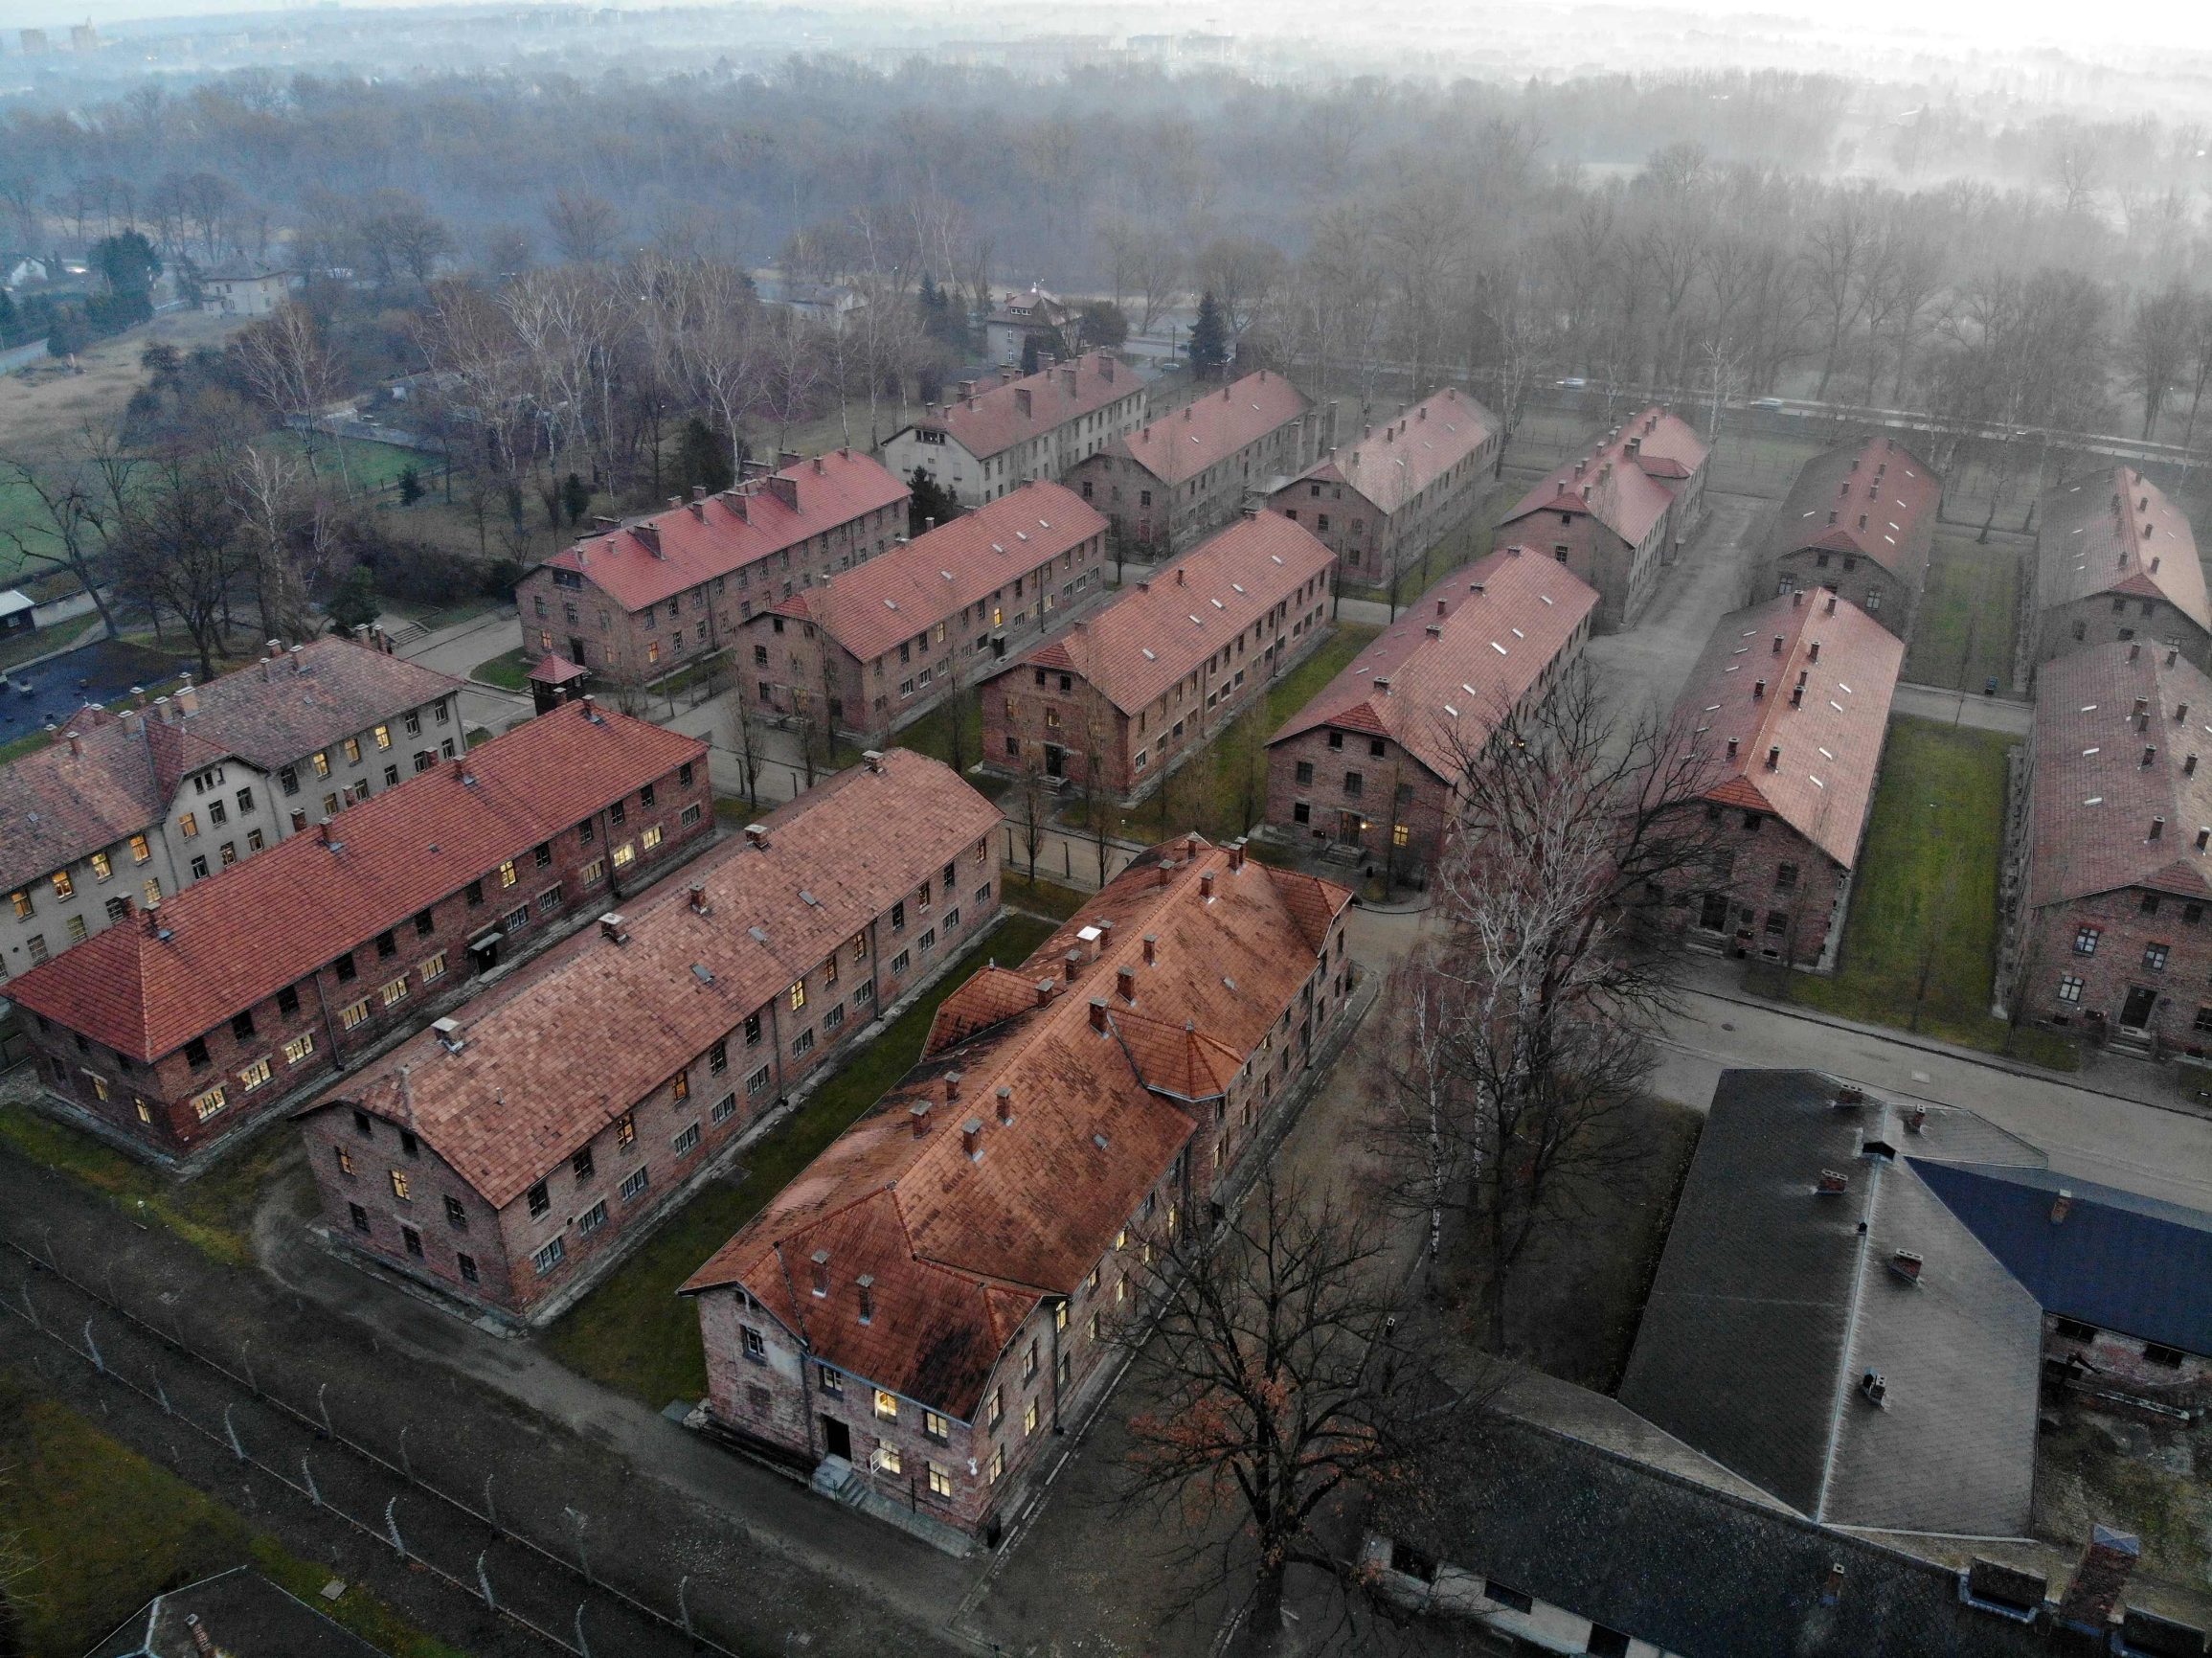 (FILES) An aerial picture taken on December 15, 2019 in Oswiecim, Poland, shows a view of the blocks of Auschwitz I, which was part of former German Nazi death camp Auschwitz-Birkenau. The site has been turned into a museum and memorial site. - Some two hundred former prisoners of the Nazi-run Auschwitz-Birkenau extermination camp, a symbol of the Holocaust of the Jews, will visit the site on January 27, 2020 to commemorate the 75th anniversary of its liberation. (Photo by Pablo GONZALEZ / AFP)